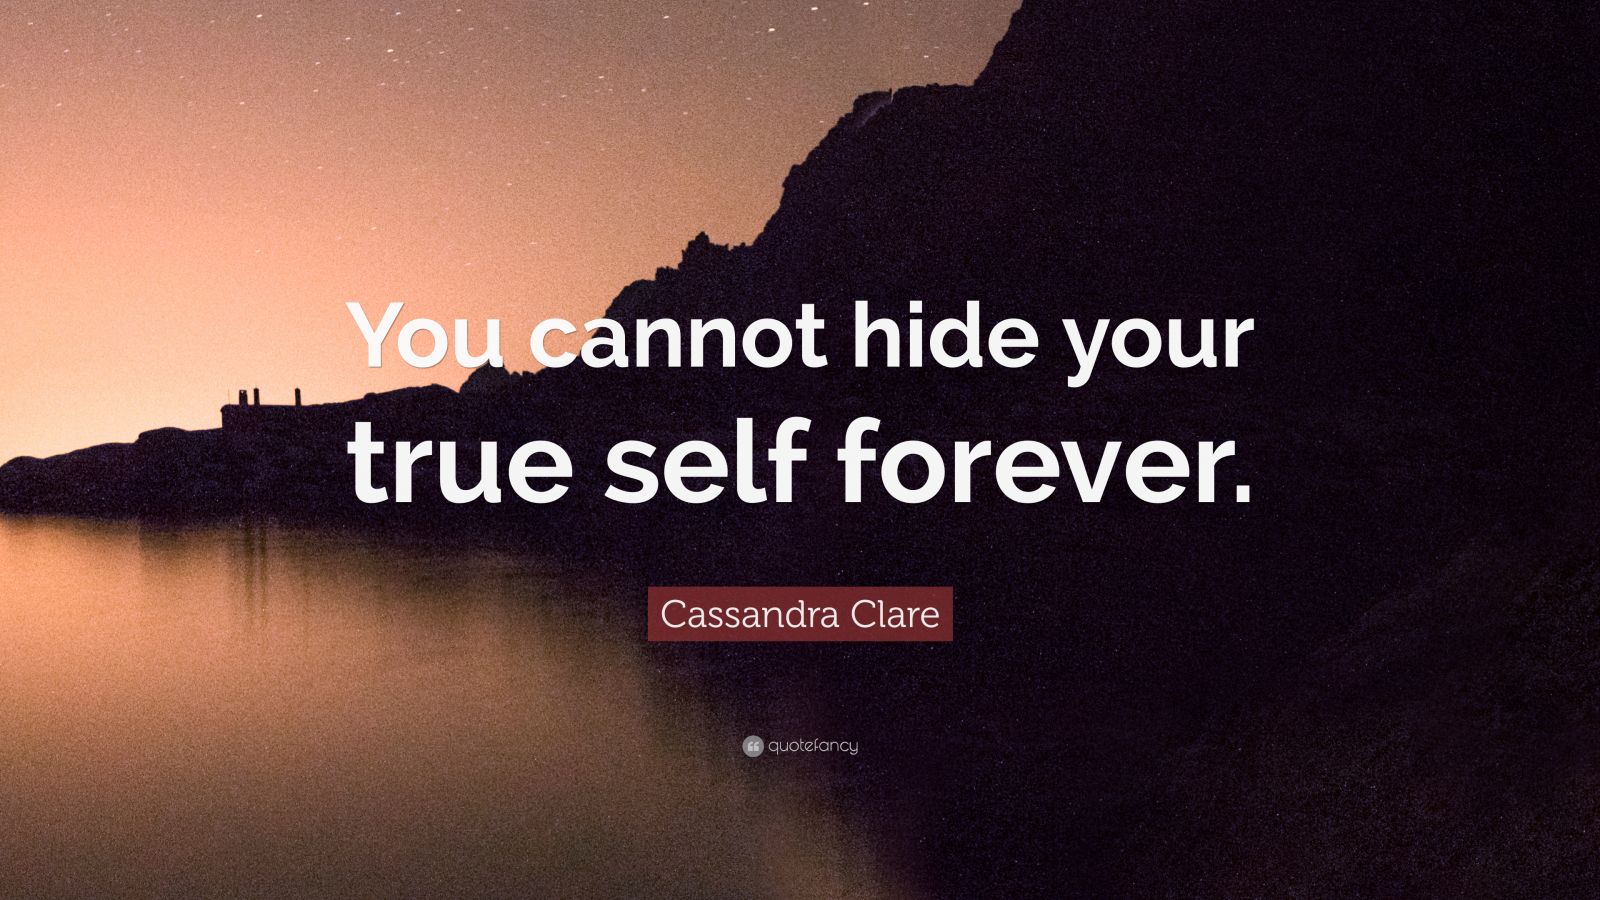 Cassandra Clare Quote: “You cannot hide your true self forever.” (11 ...